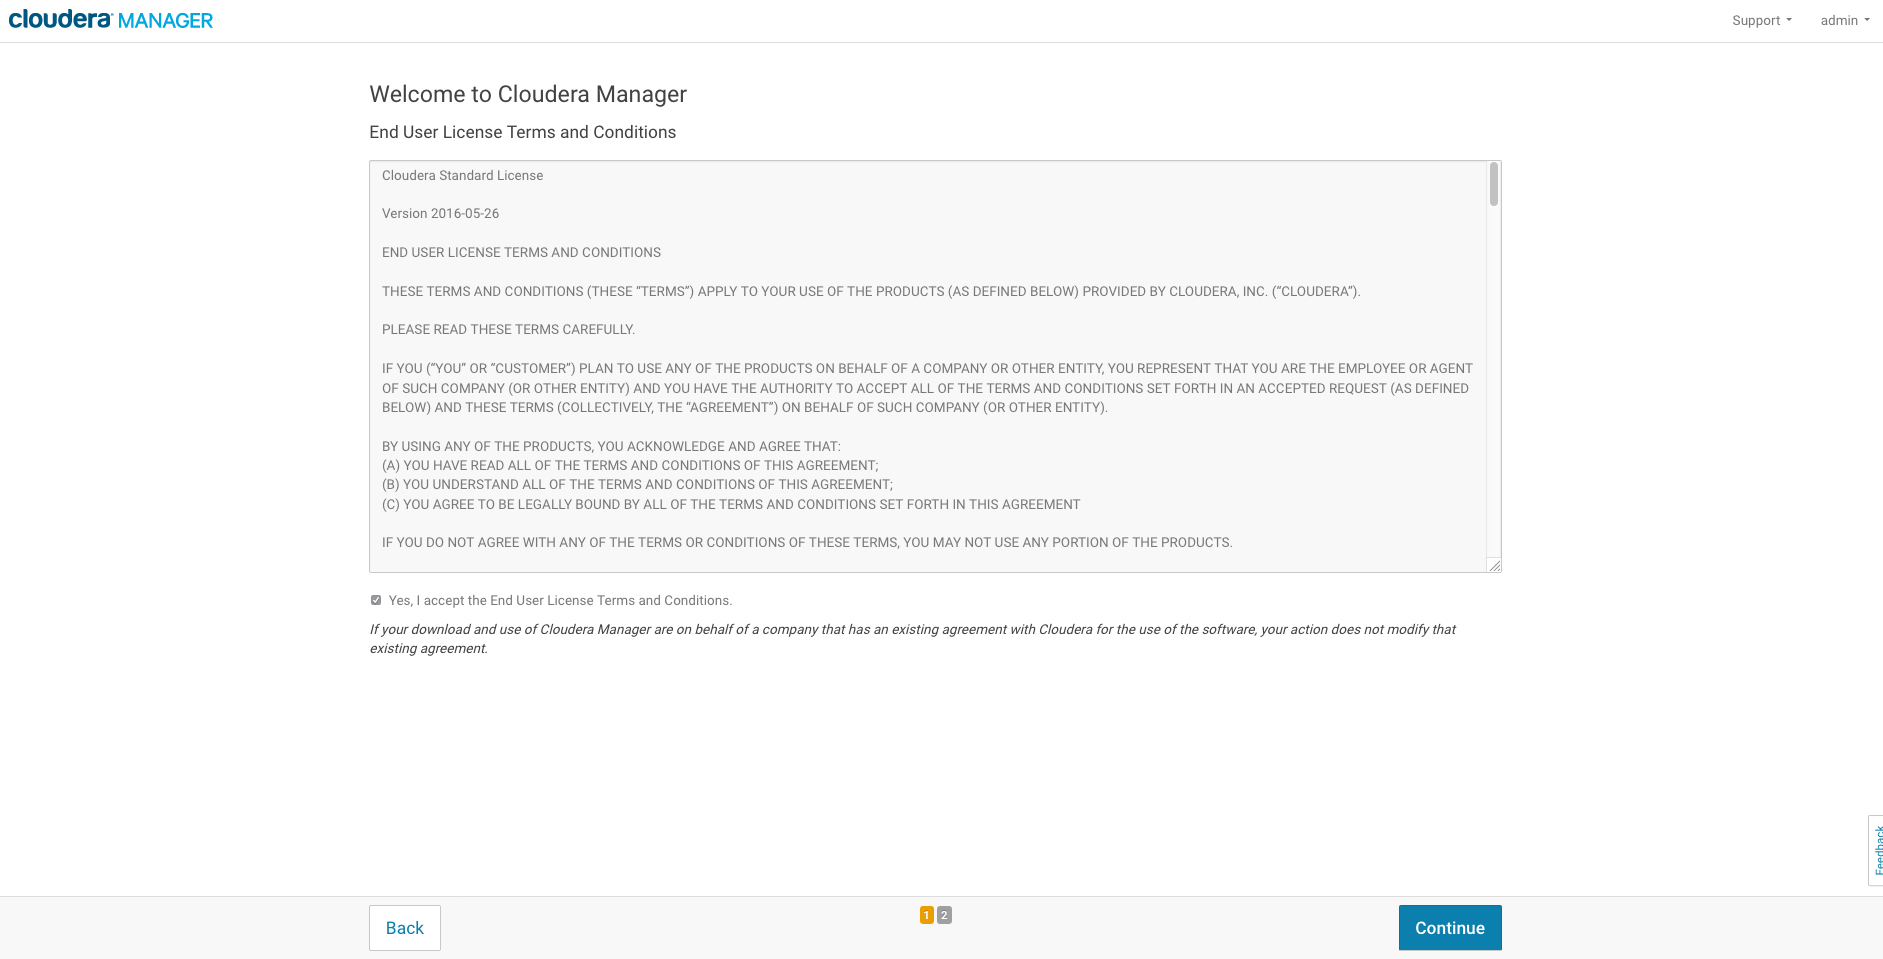 Cloudera-Manager-Conditions